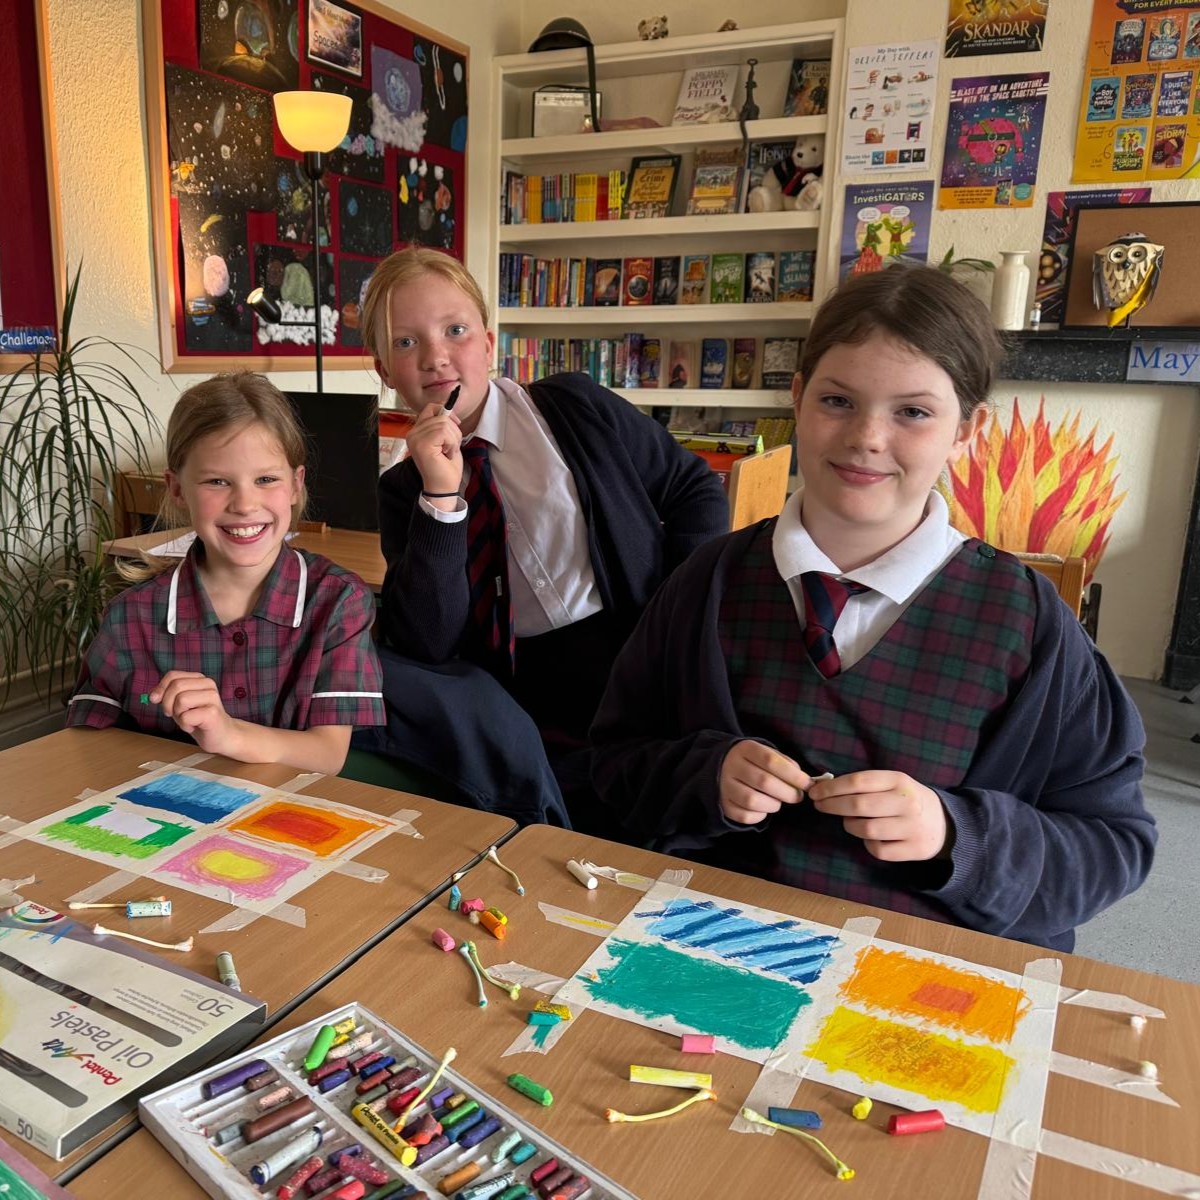 We had a busy bank holiday yesterday with a fantastic, buzzy open morning at our Prep School. Our pupils were joined by visiting families to take part in some fun activities, and share the Oswestry magic! #thisisoswestry #discoveryday #openmorning #discoverthemagic #shropshire